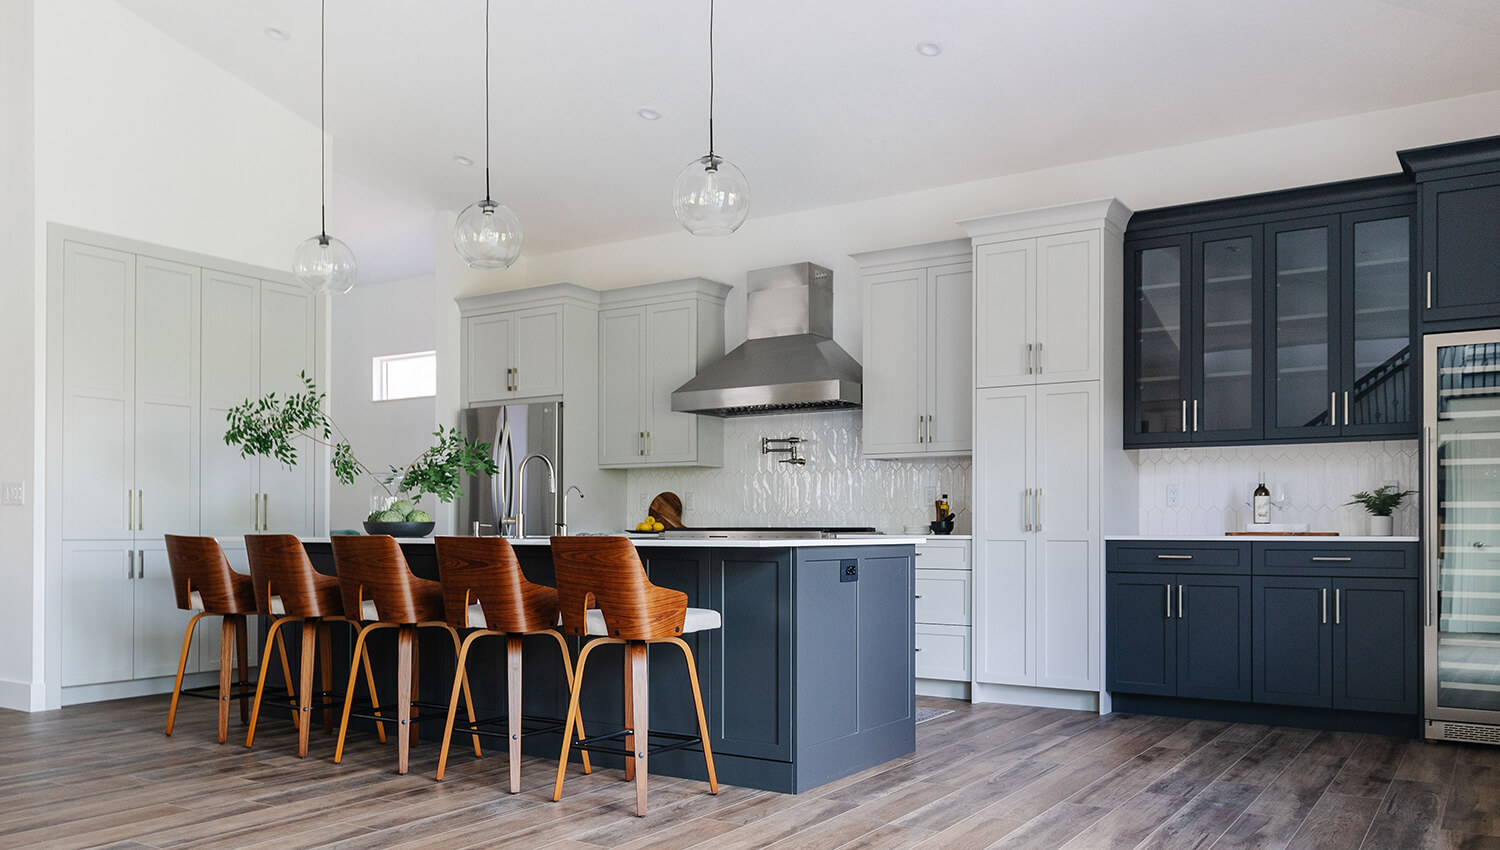 A two-toned mid-century modern kitchen design with uses black and white painted cabinets.